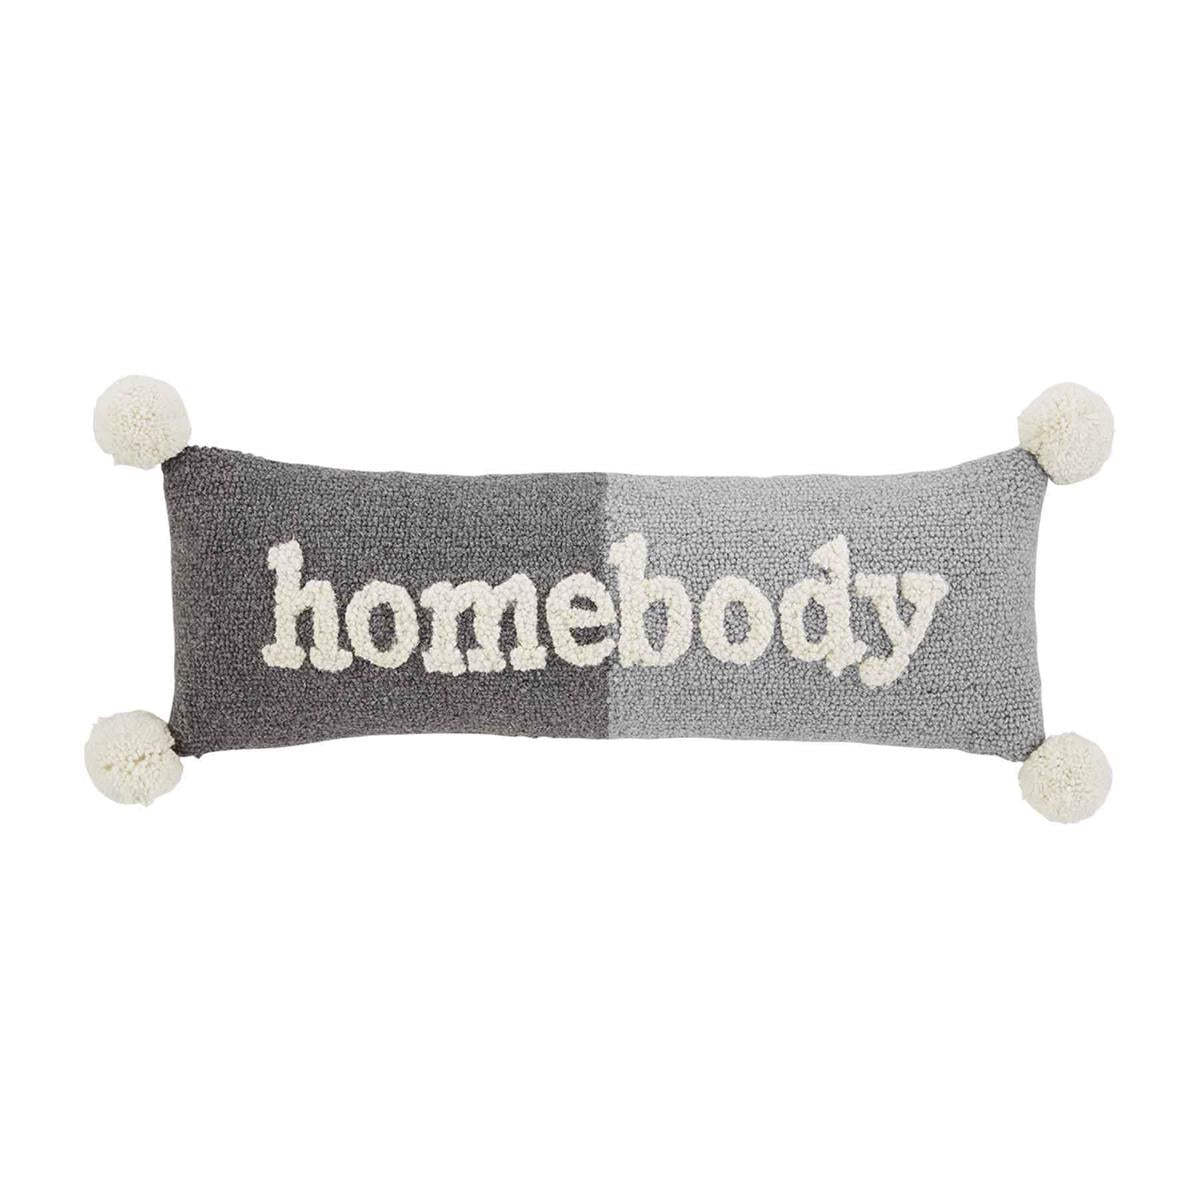 Homebody Hooked Pillow